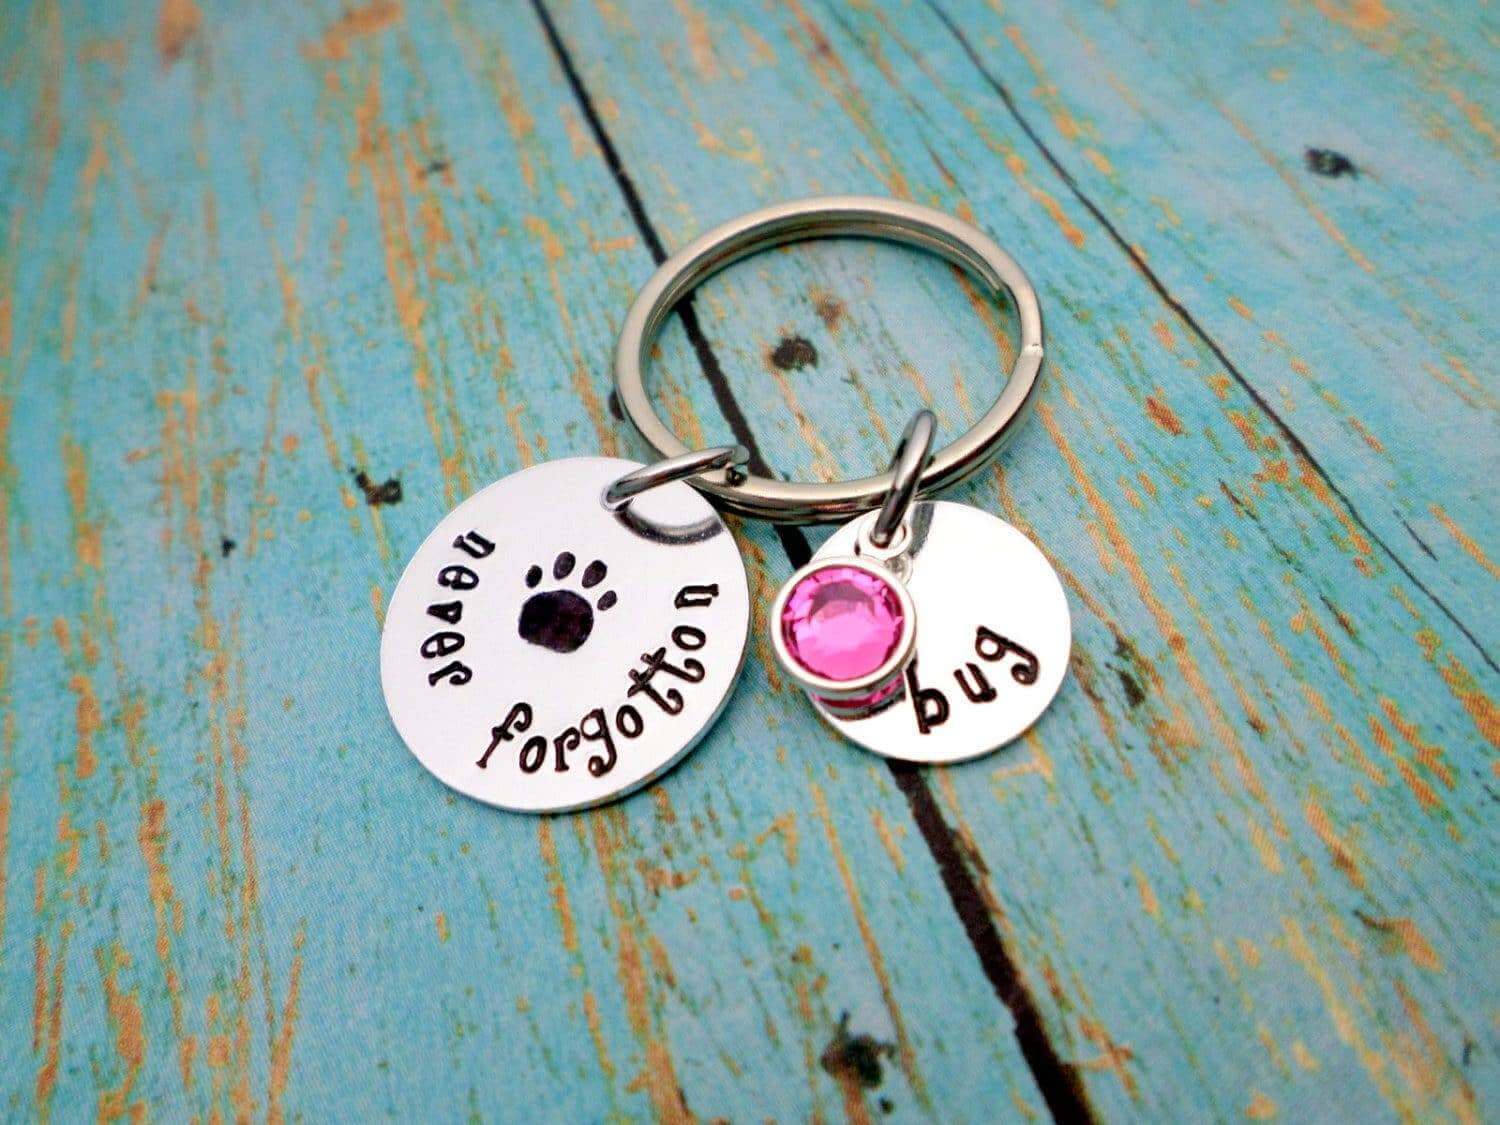 Never Forgotton, Pet Memorial, Angel With Paws, Family Dog, Family Cat, Family Pet, Lost Pet, Res, Keychains, HandmadeLoveStories, HandmadeLoveStories , [Handmade_Love_Stories], [Hand_Stamped_Jewelry], [Etsy_Stamped_Jewelry], [Etsy_Jewelry]